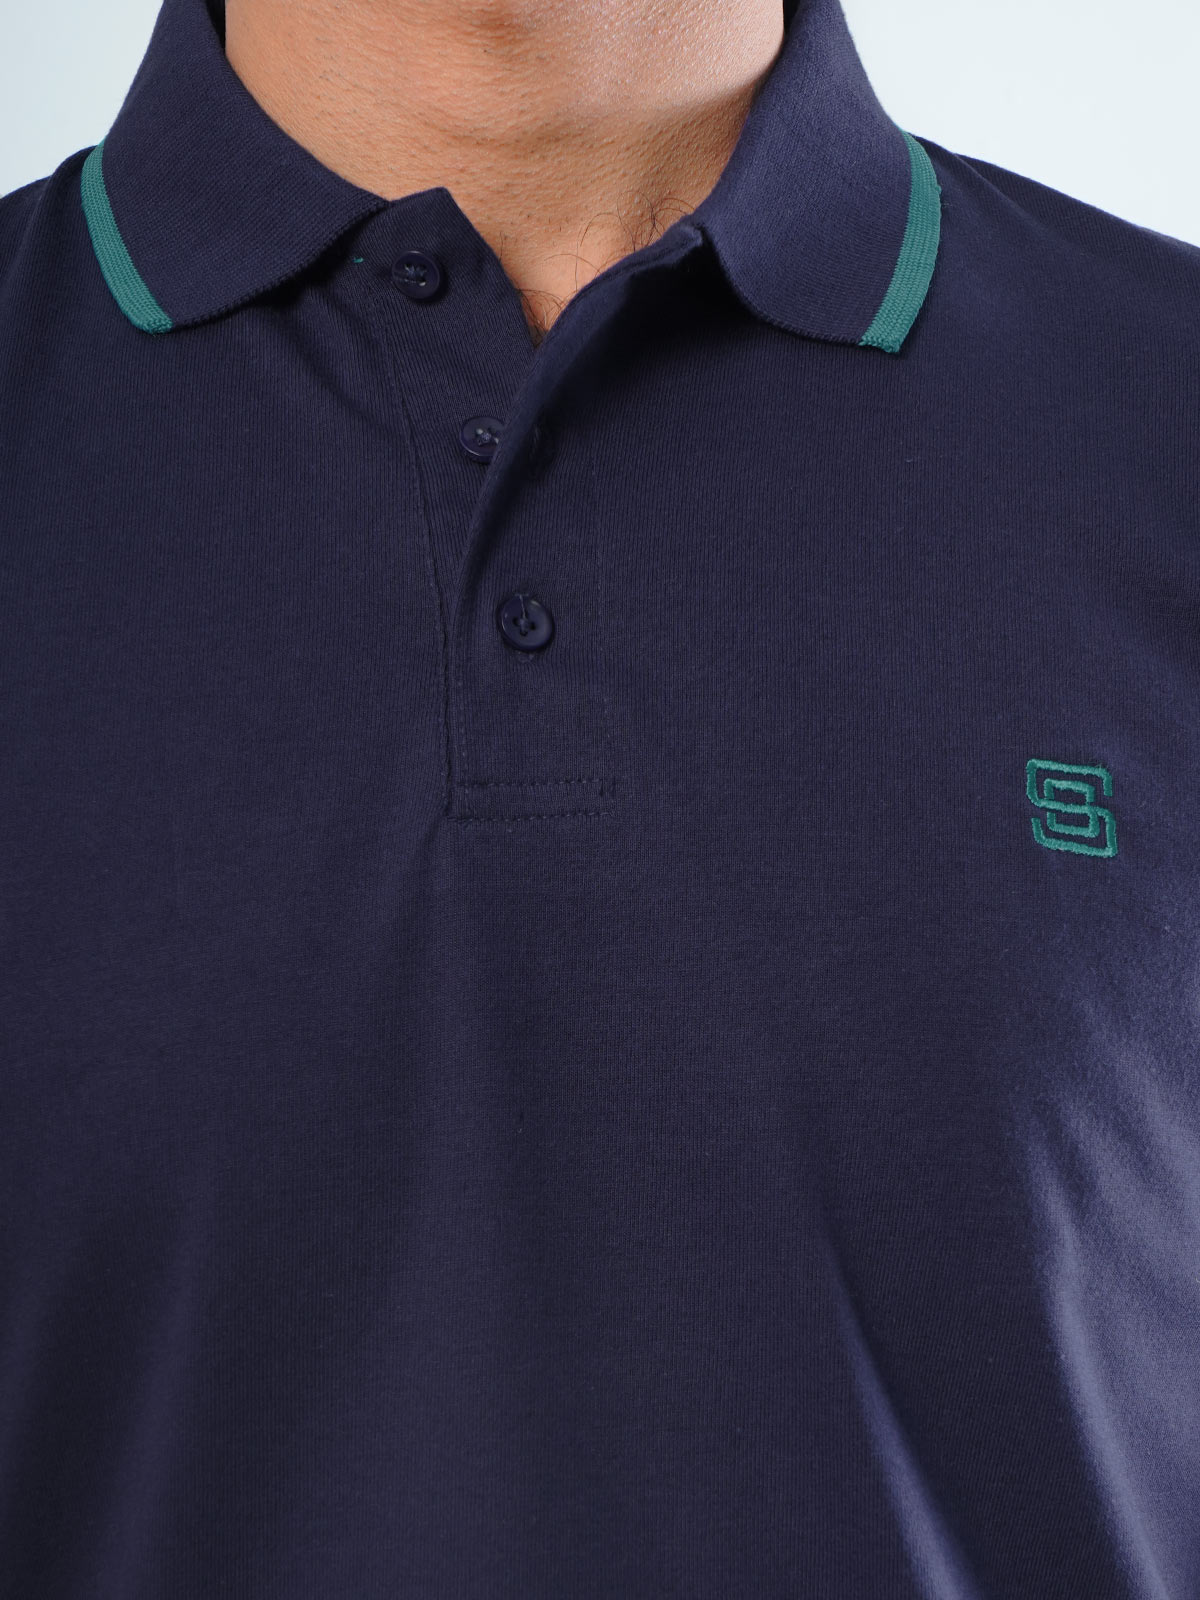 Navy Blue Plain Contrast Tipping Half Sleeves Cotton Jersey Polo T-Shirt (POLO-536)